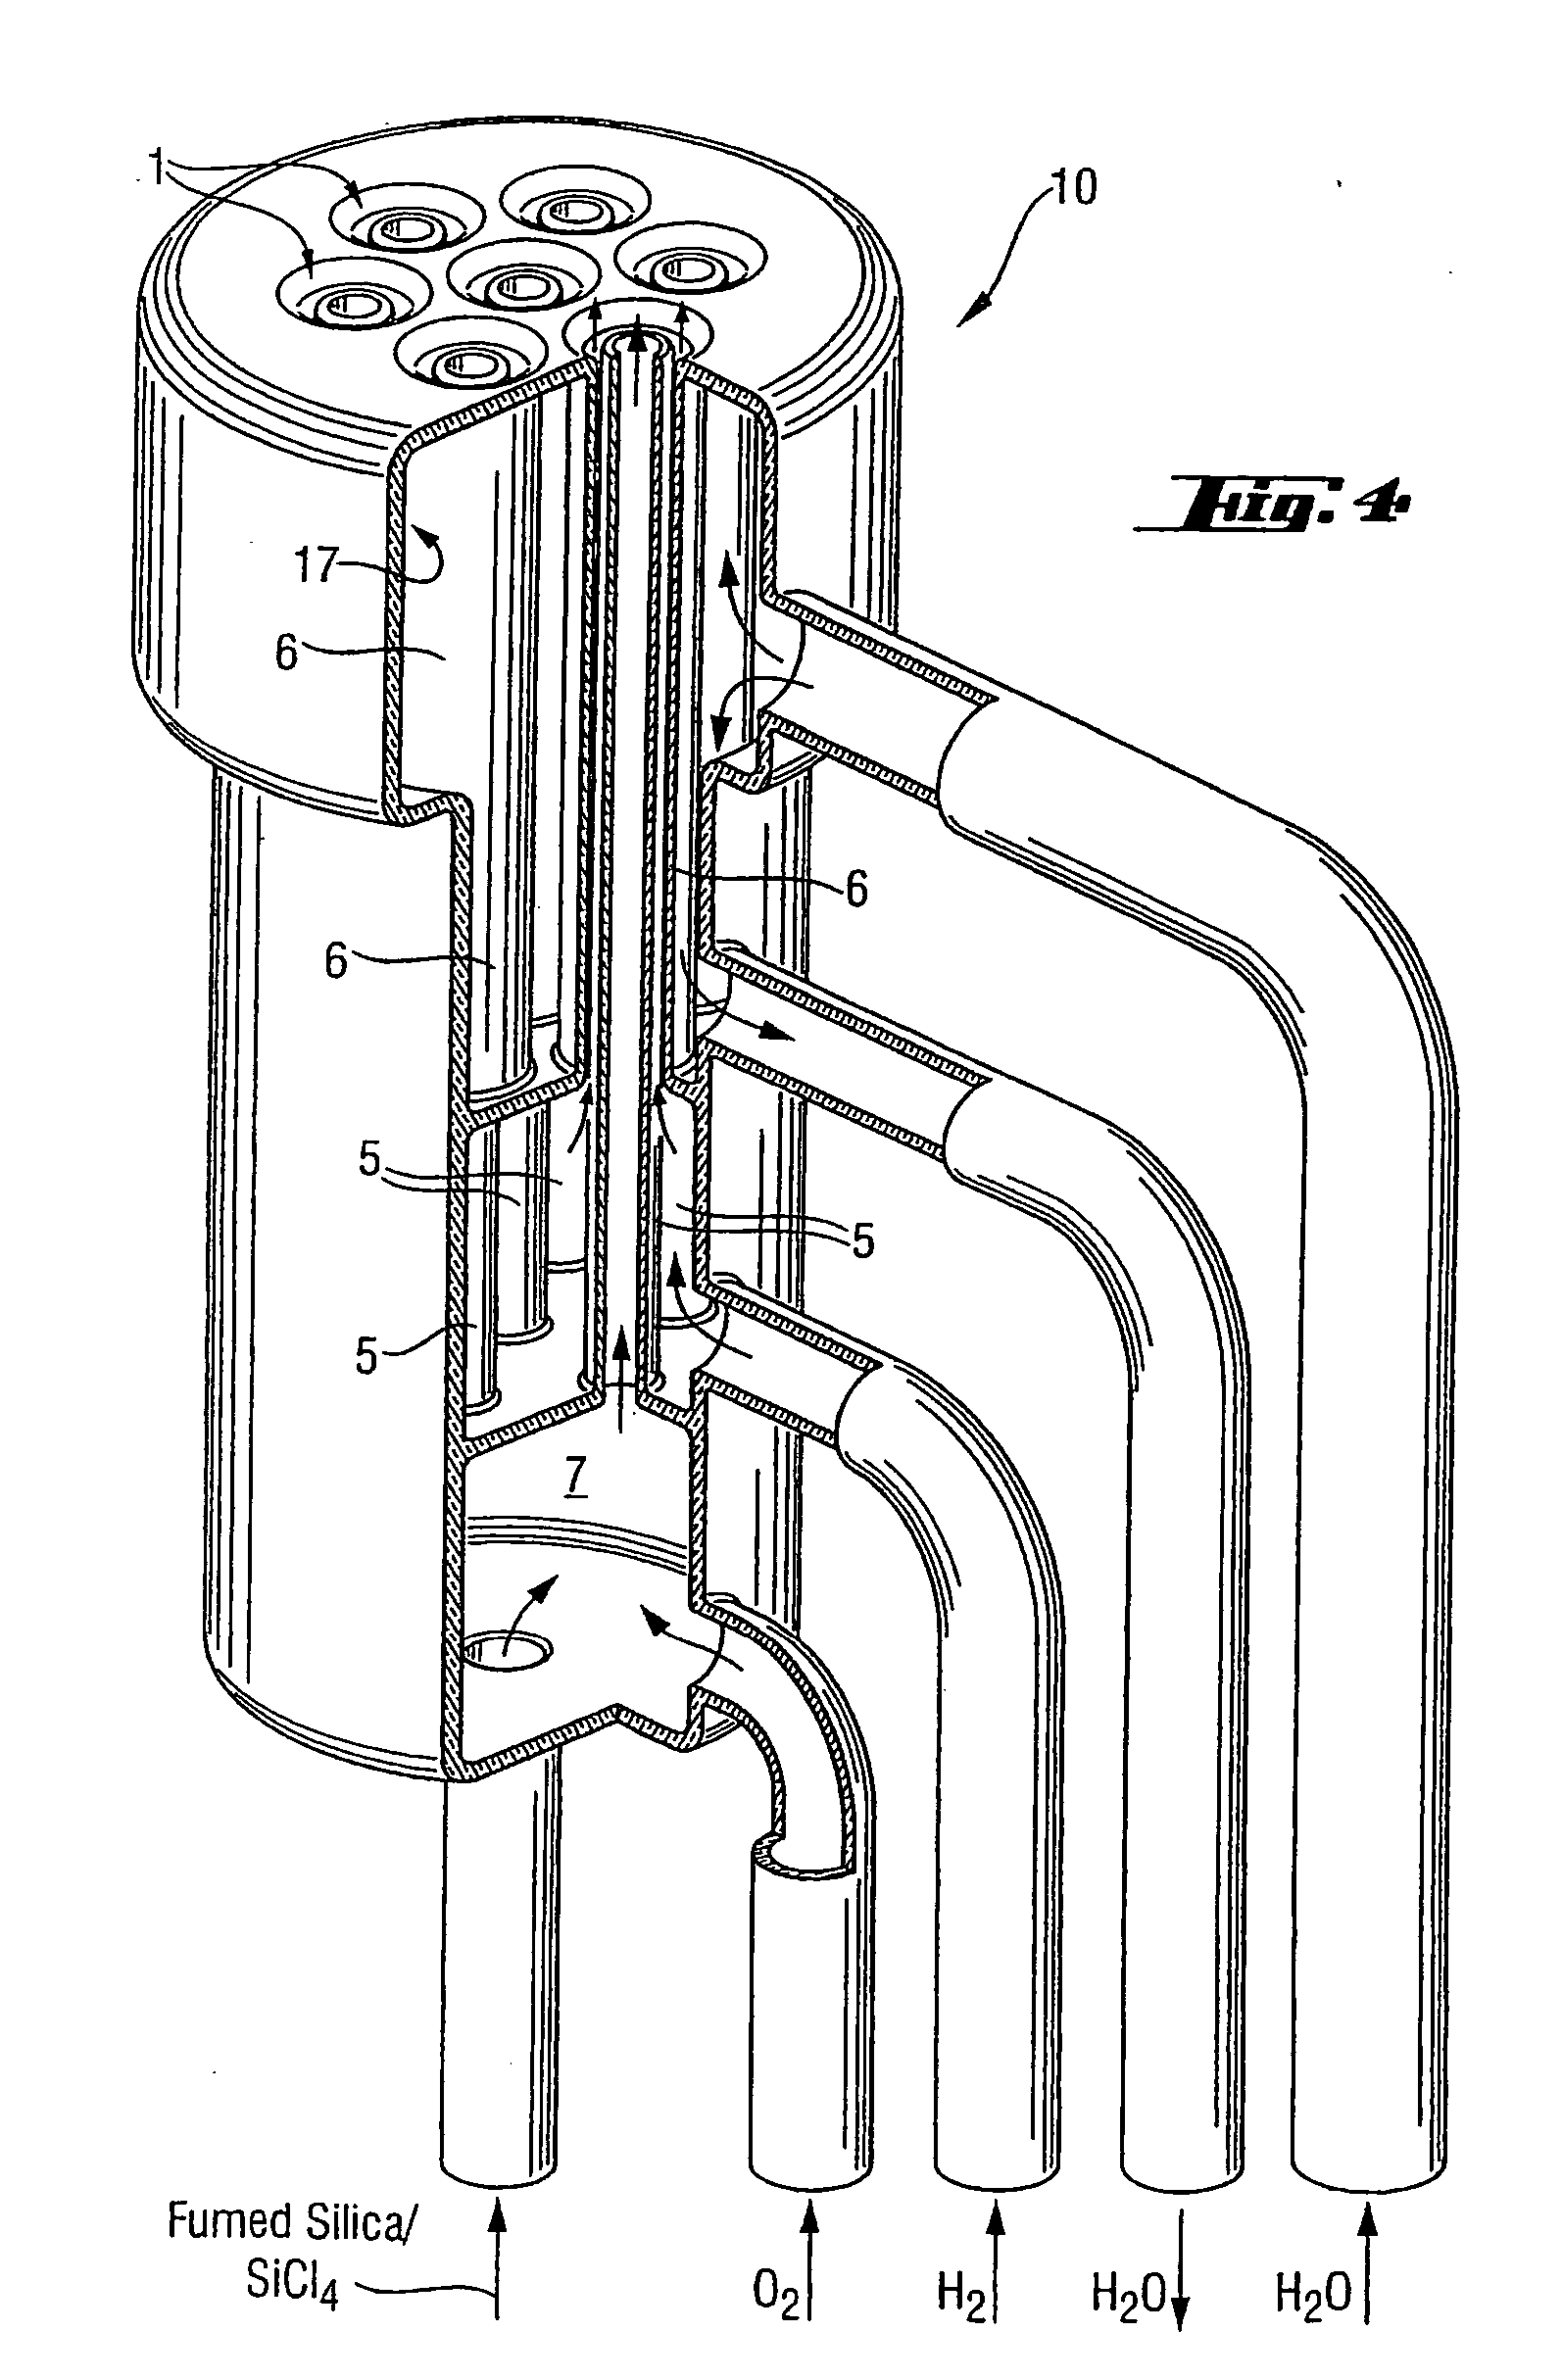 High-purity silica powder, and process and apparatus for producing it